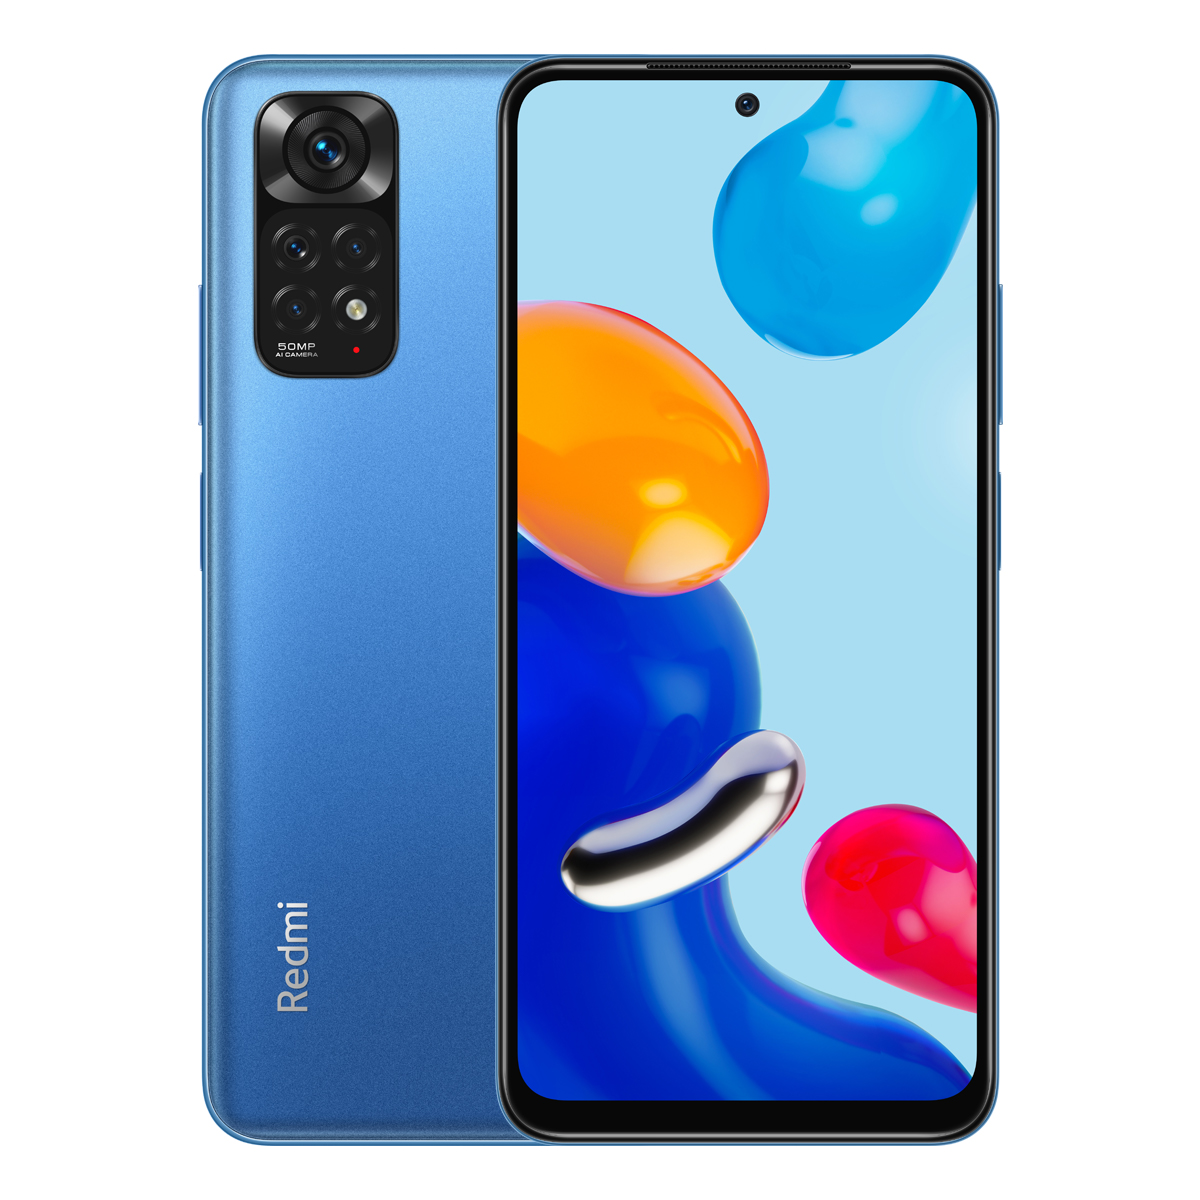 Find Xiaomi Redmi Note 11 Global Version Snapdragon 680 50MP Quad Camera 33W Pro Fast Charge 64GB 128GB 6 43 inch 90Hz AMOLED Octa Core 4G Smartphone for Sale on Gipsybee.com with cryptocurrencies